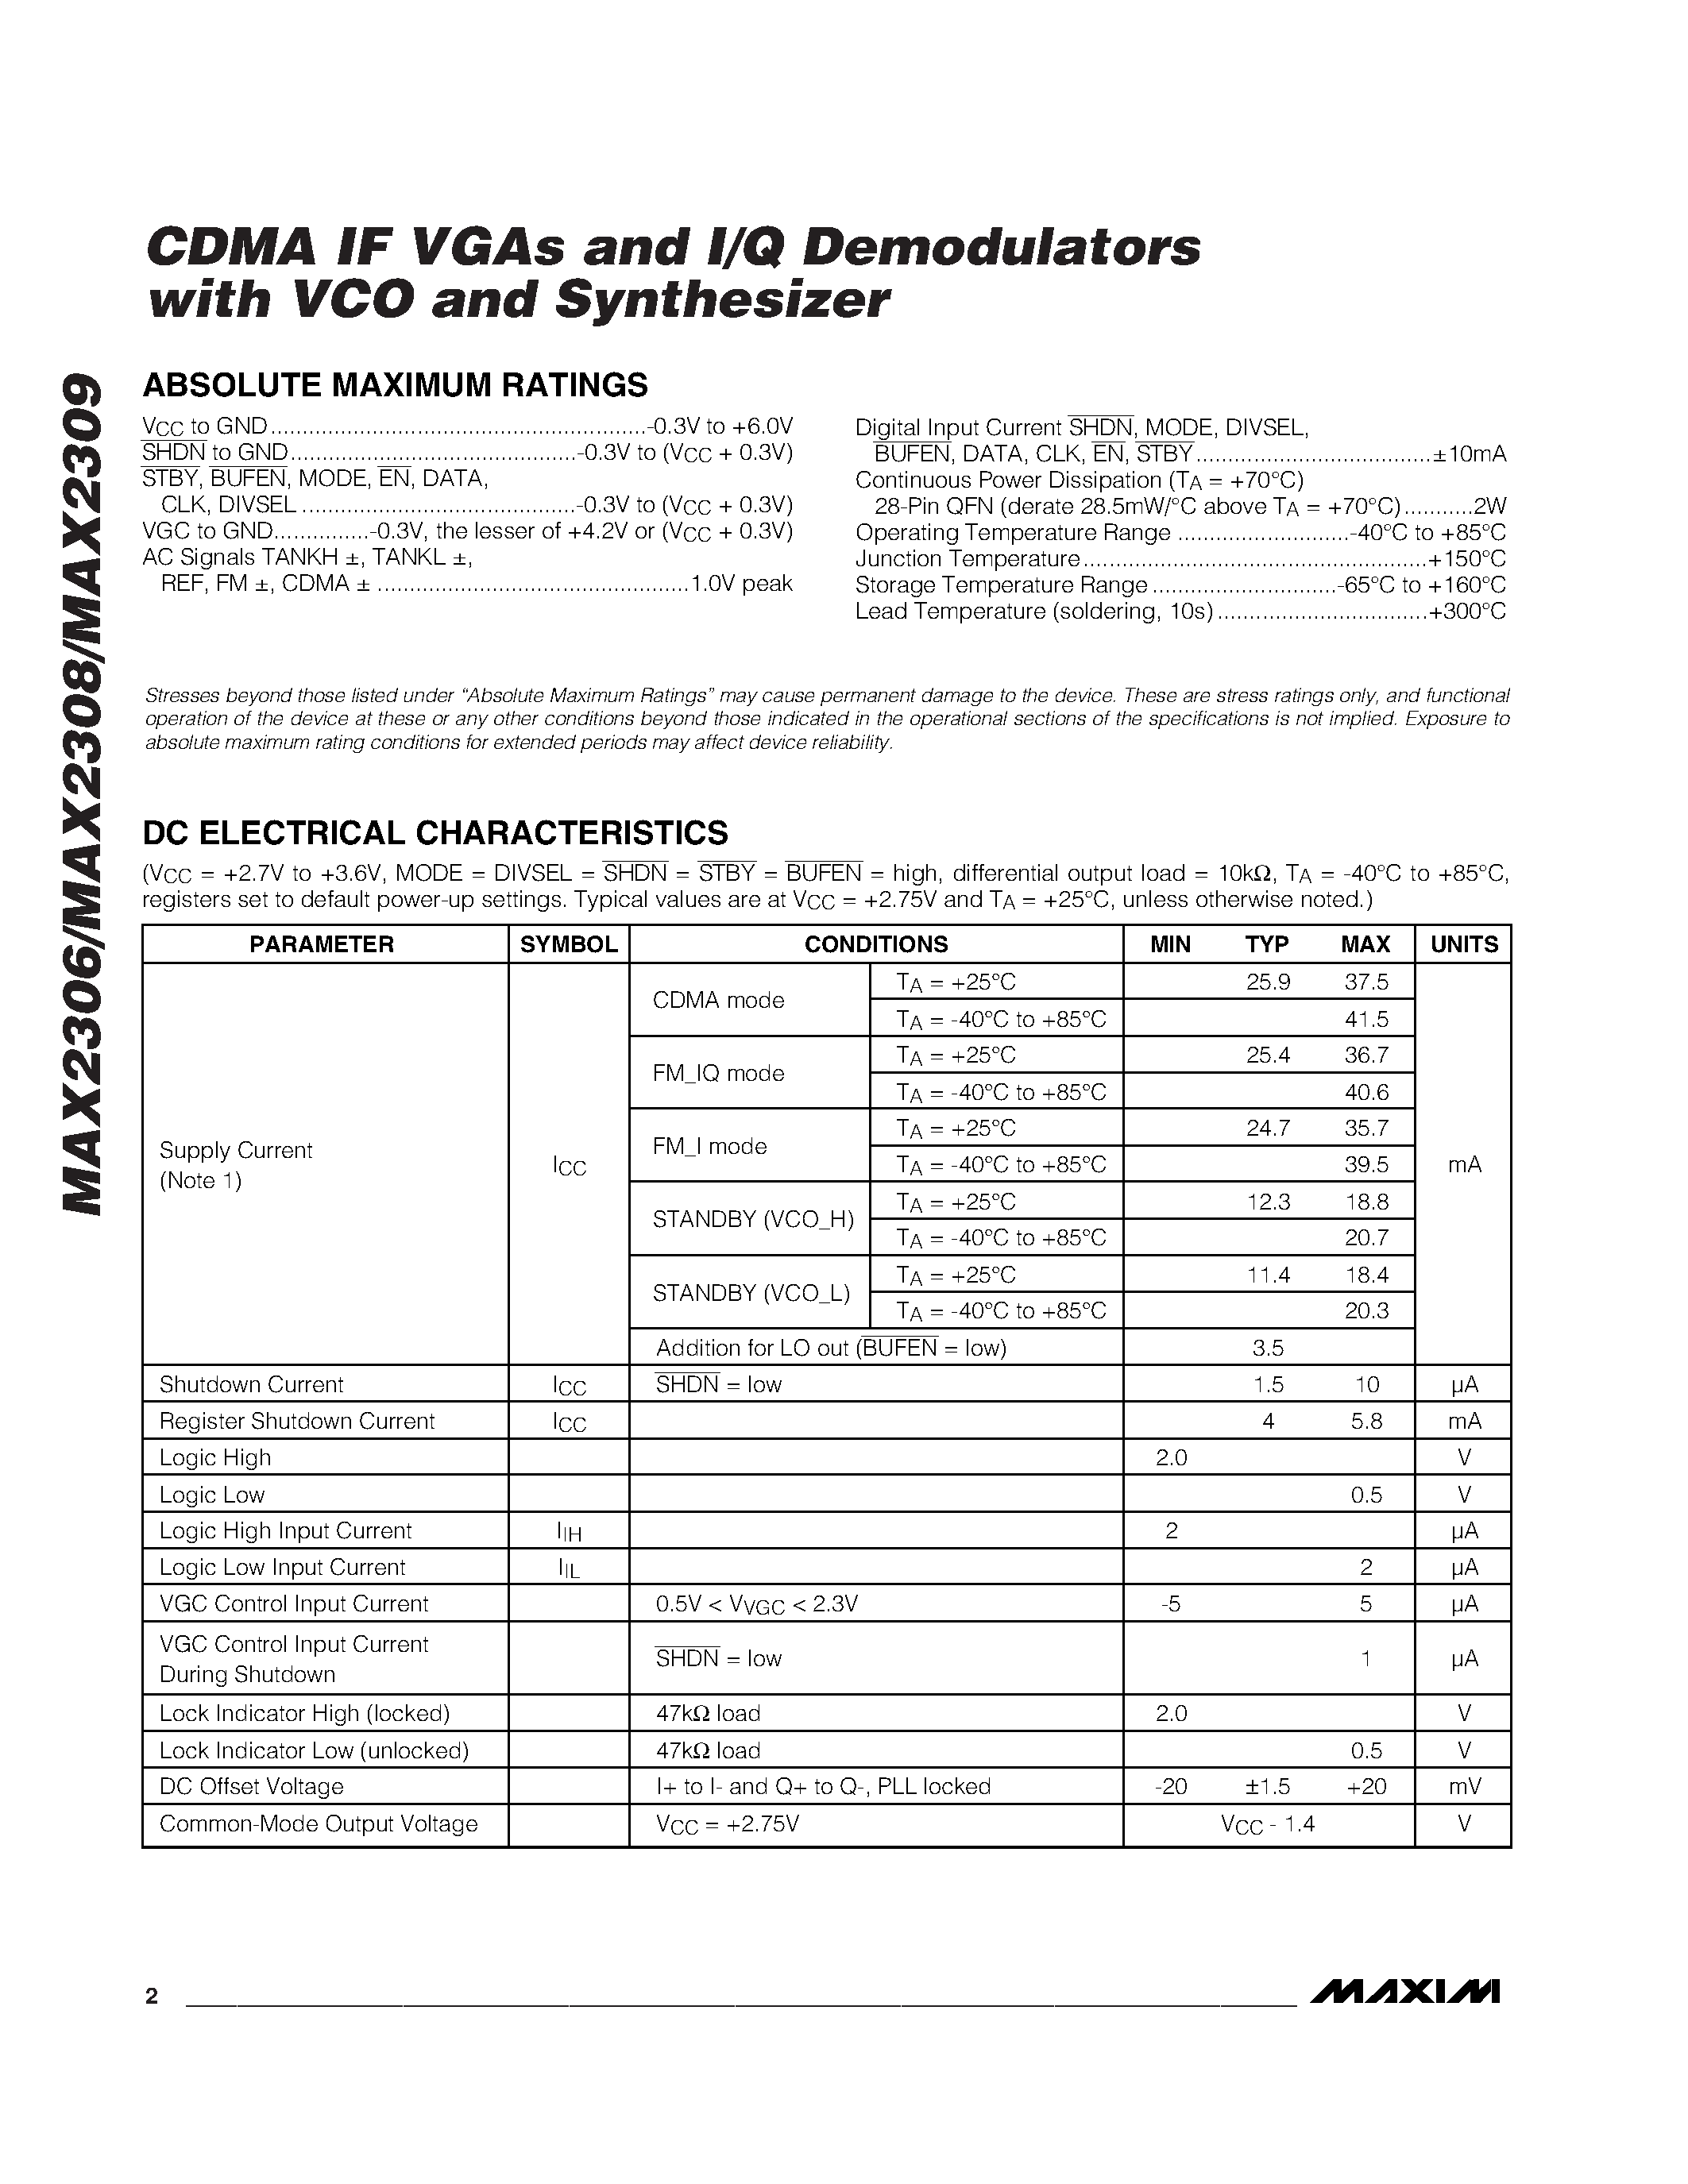 Datasheet MAX2306 - CDMA IF VGAs and I/Q Demodulators with VCO and Synthesizer page 2